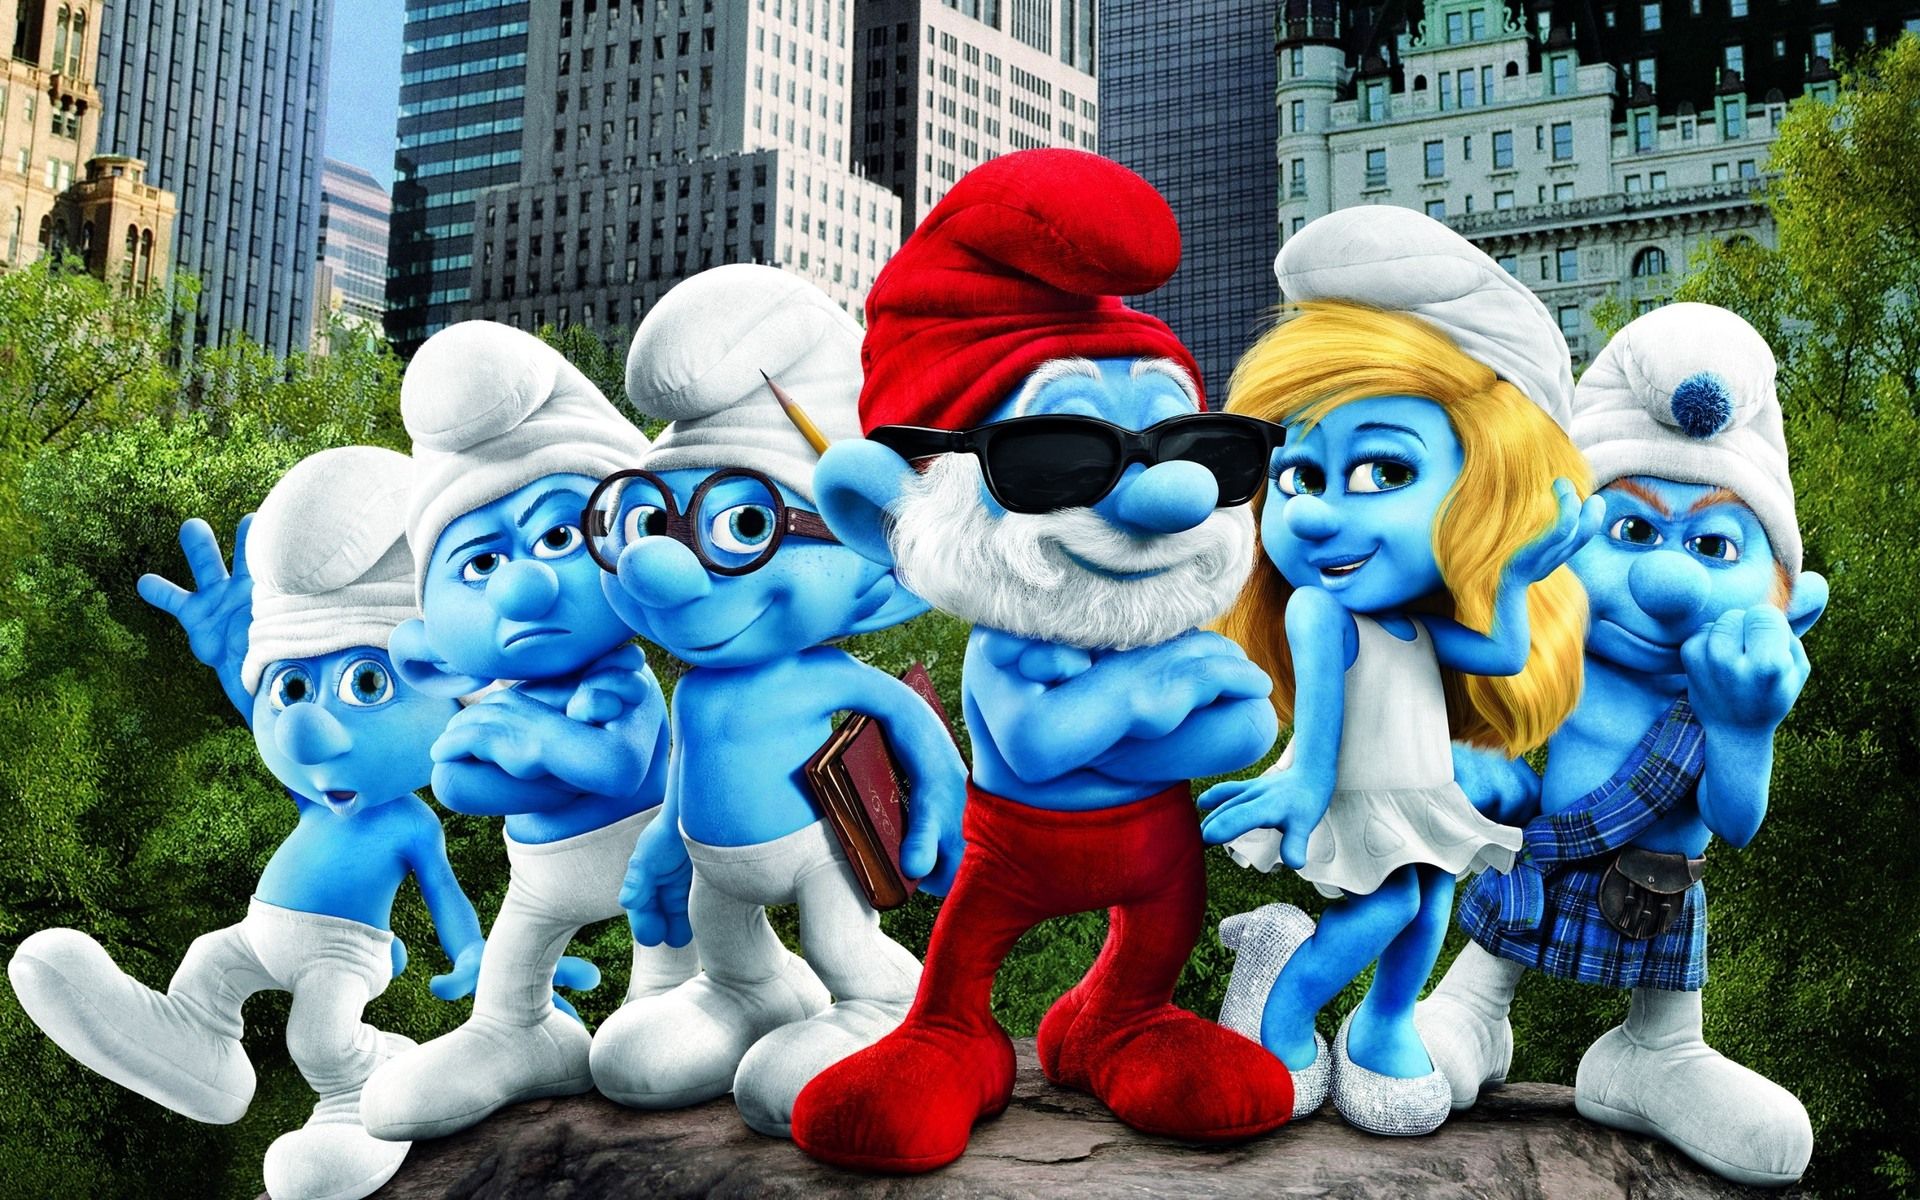 Clumsy The Smurfs 2 iPhone 5s Wallpaper Download  iPhone Wallpapers iPad  wallpapers Onestop Download  Smurfs The smurfs 2 Smurfs party